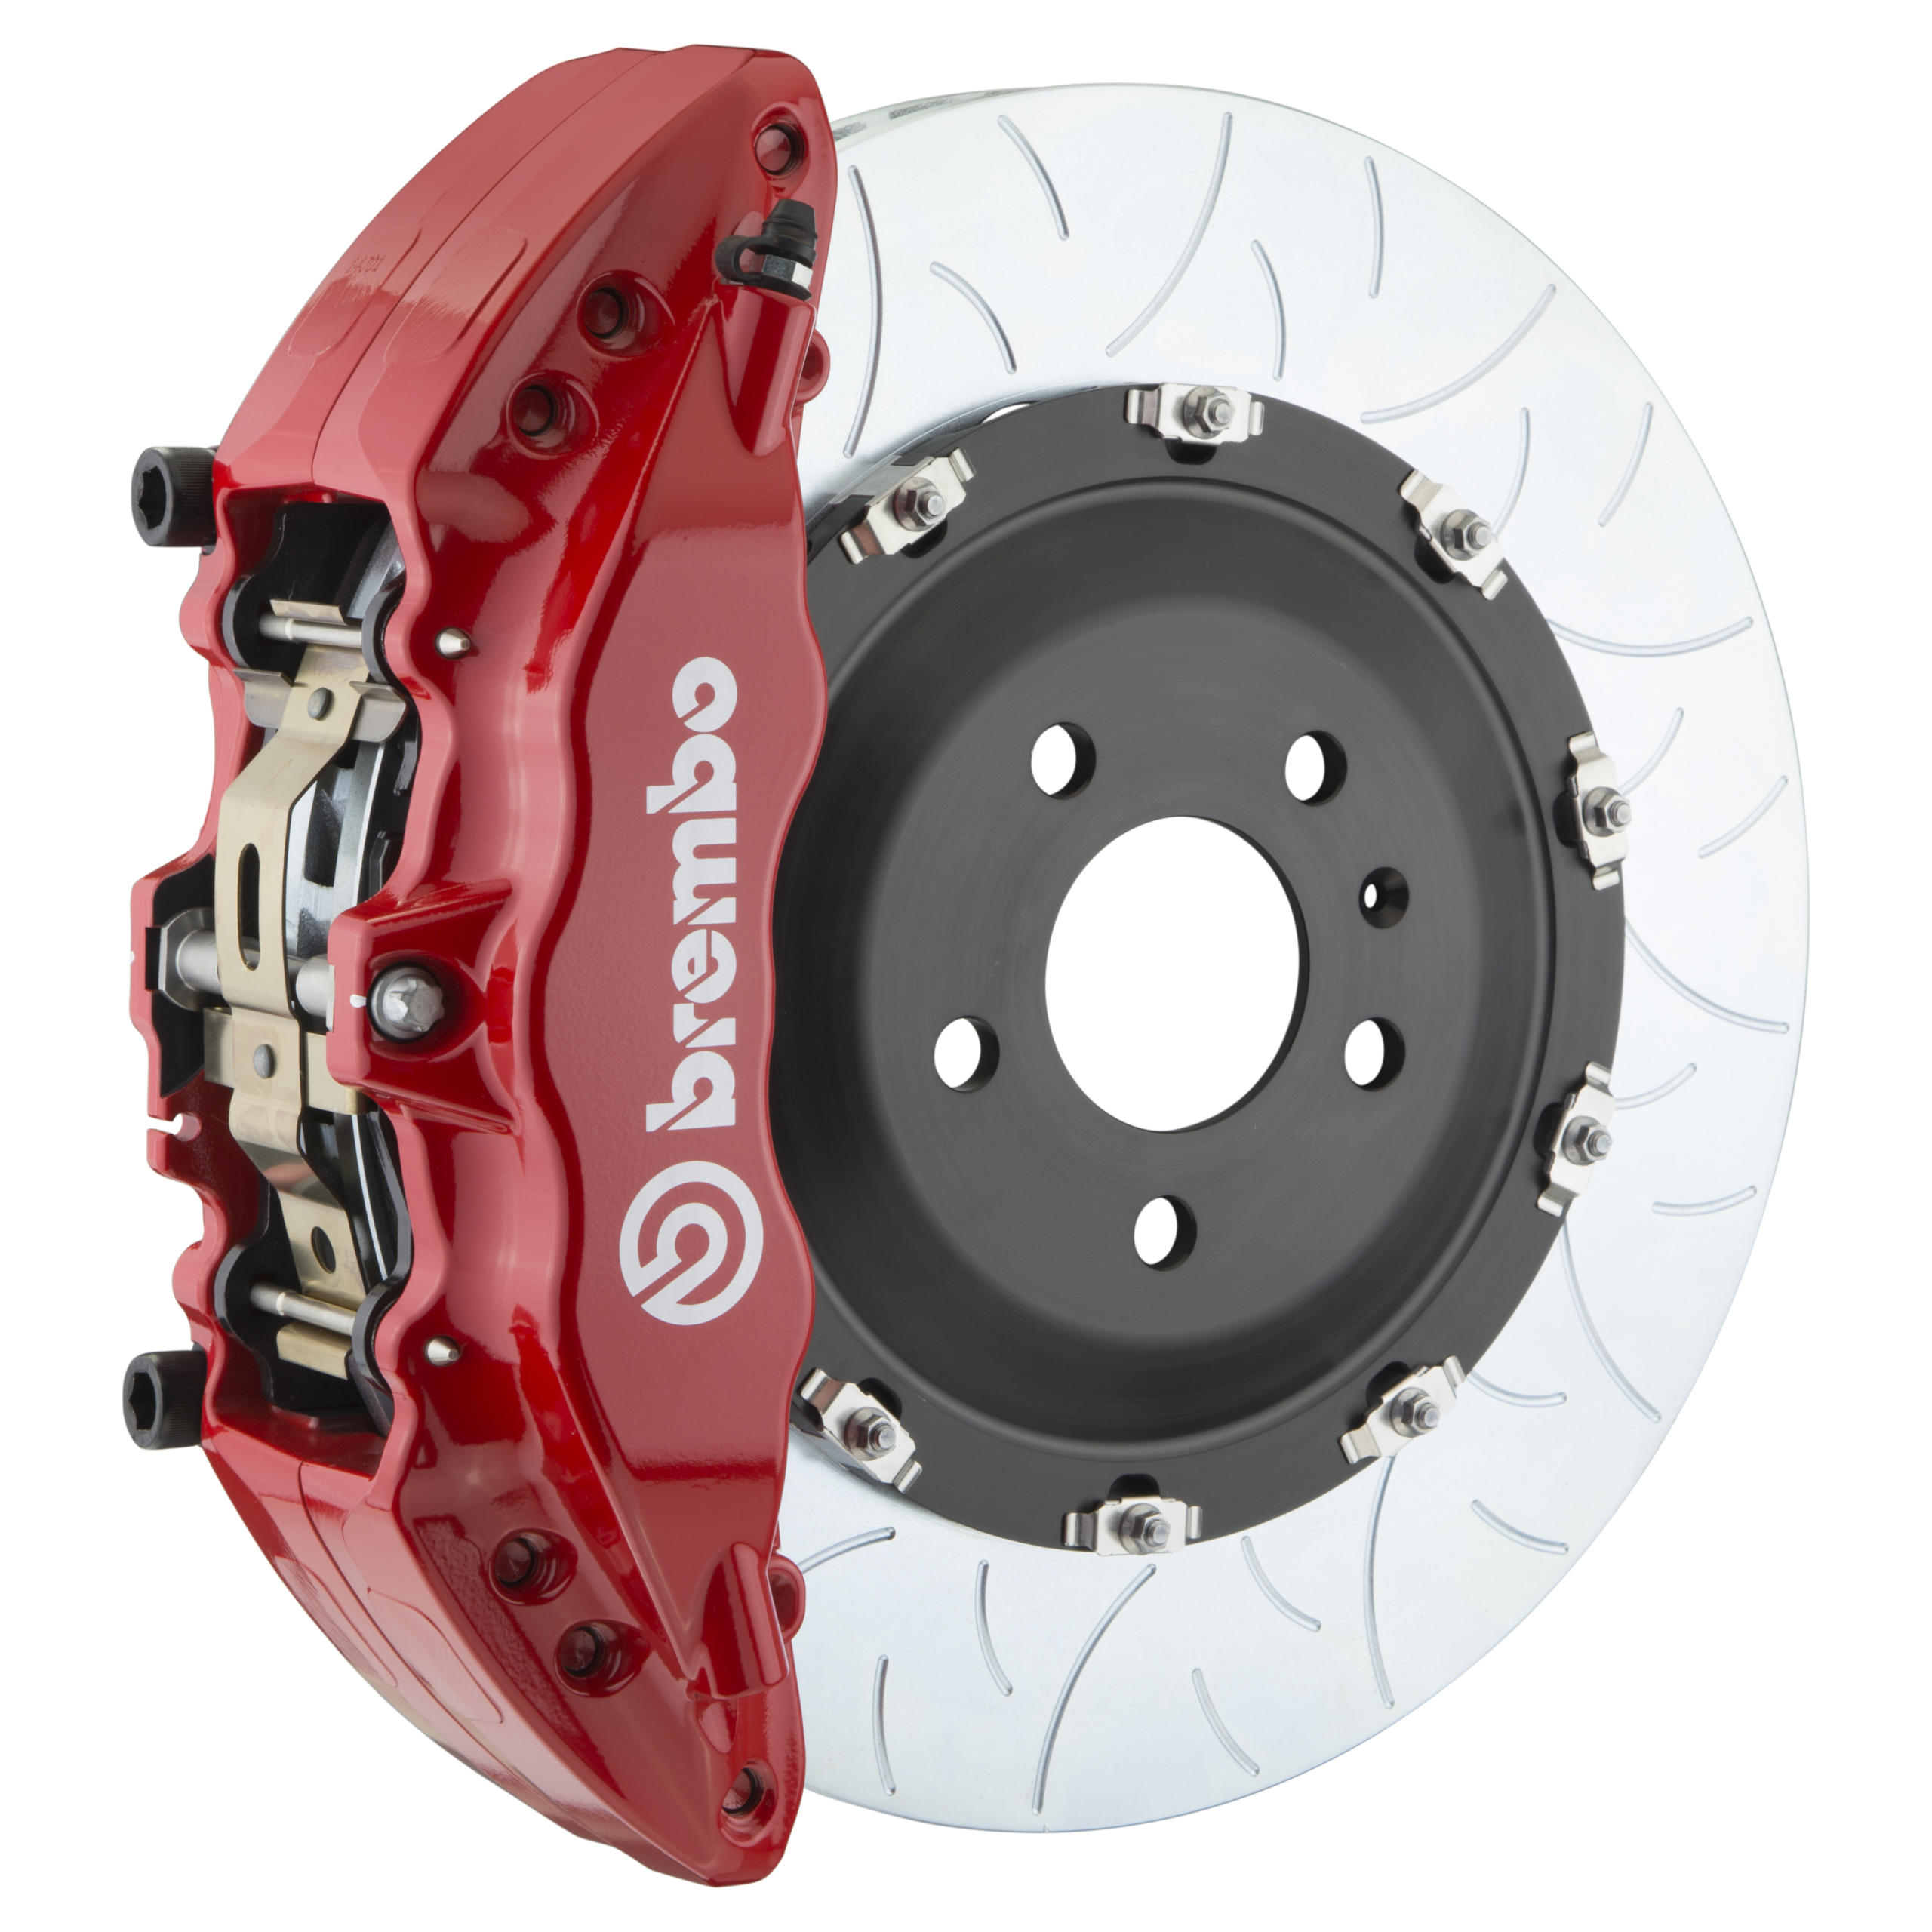 Brembo Brakes  Upgrade your braking today with the best #1